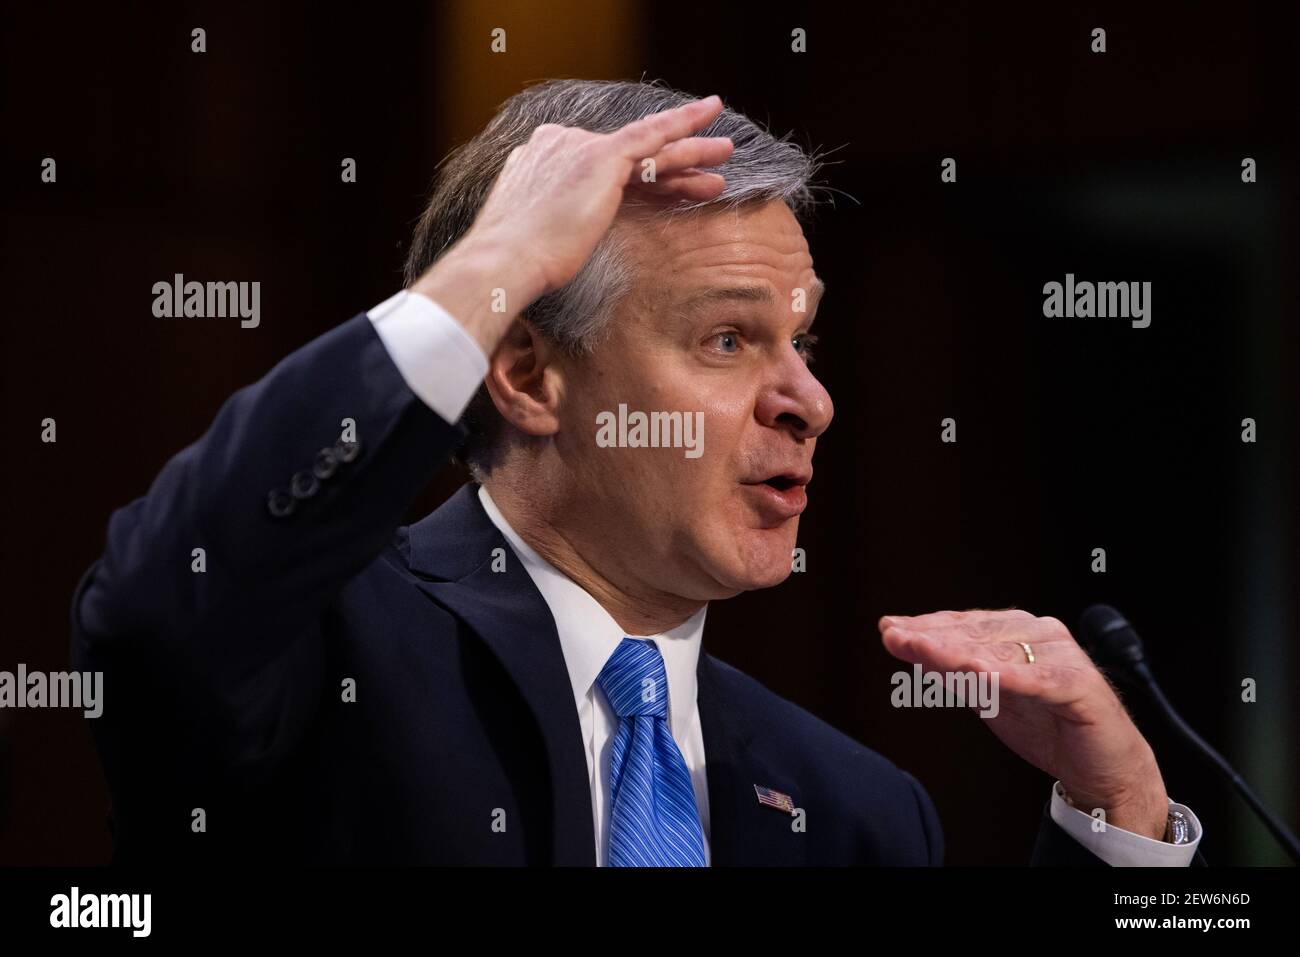 Federal Bureau of Investigation Director Christopher Wray testifies on Capitol Hill, in Washington, before a Senate Judiciary Committee on the the January 6th Insurrection, domestic terrorism and other threats, Tuesday, March 2, 2021.Credit: Graeme Jennings/Pool via CNP/MediaPunch Stock Photo